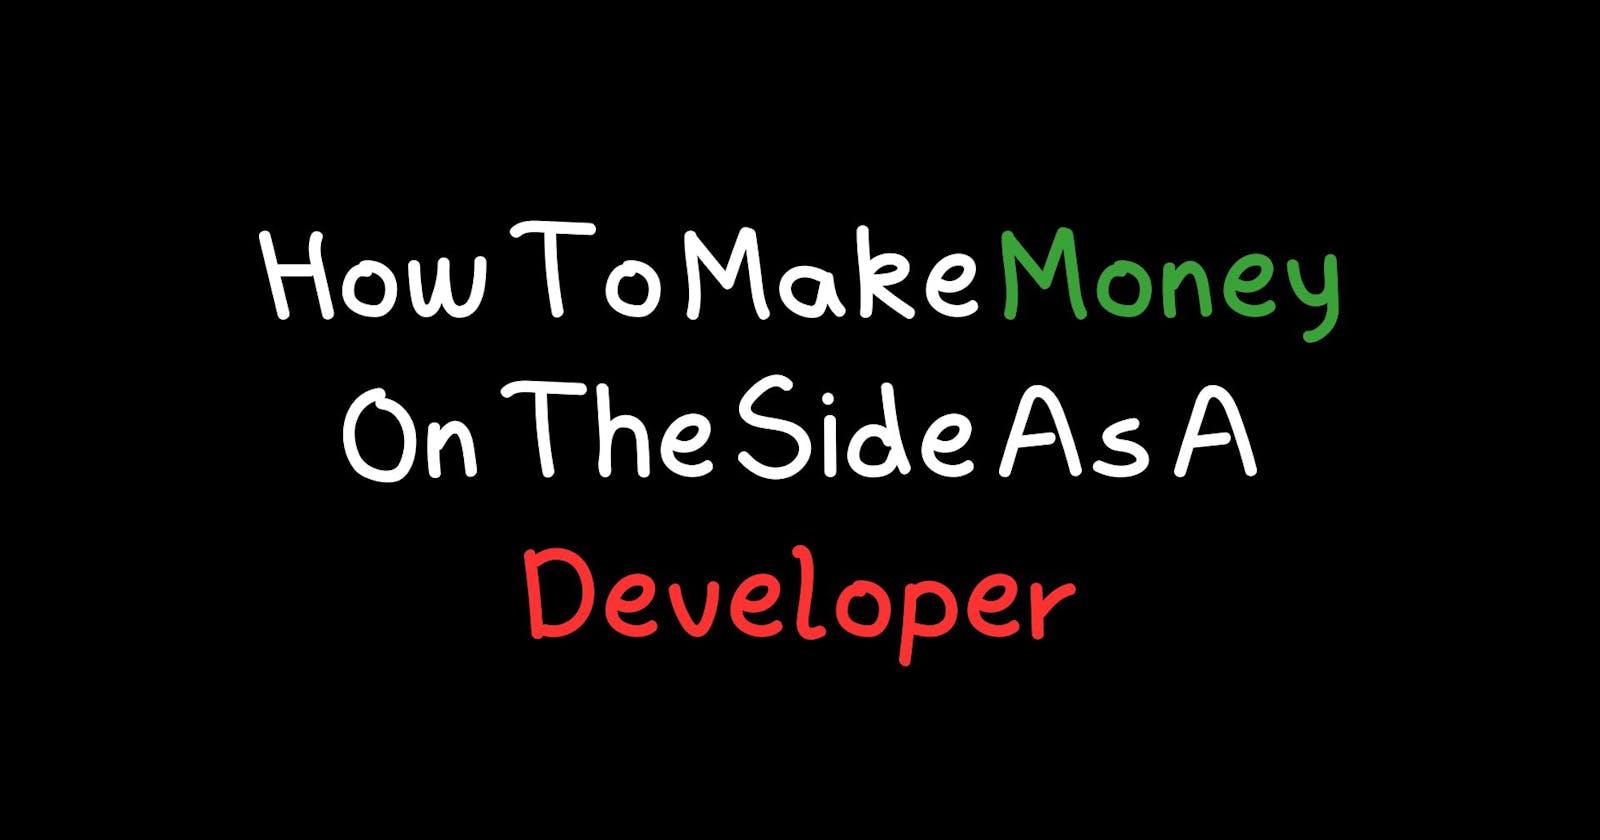 How To Make Money On The Side As A Developer